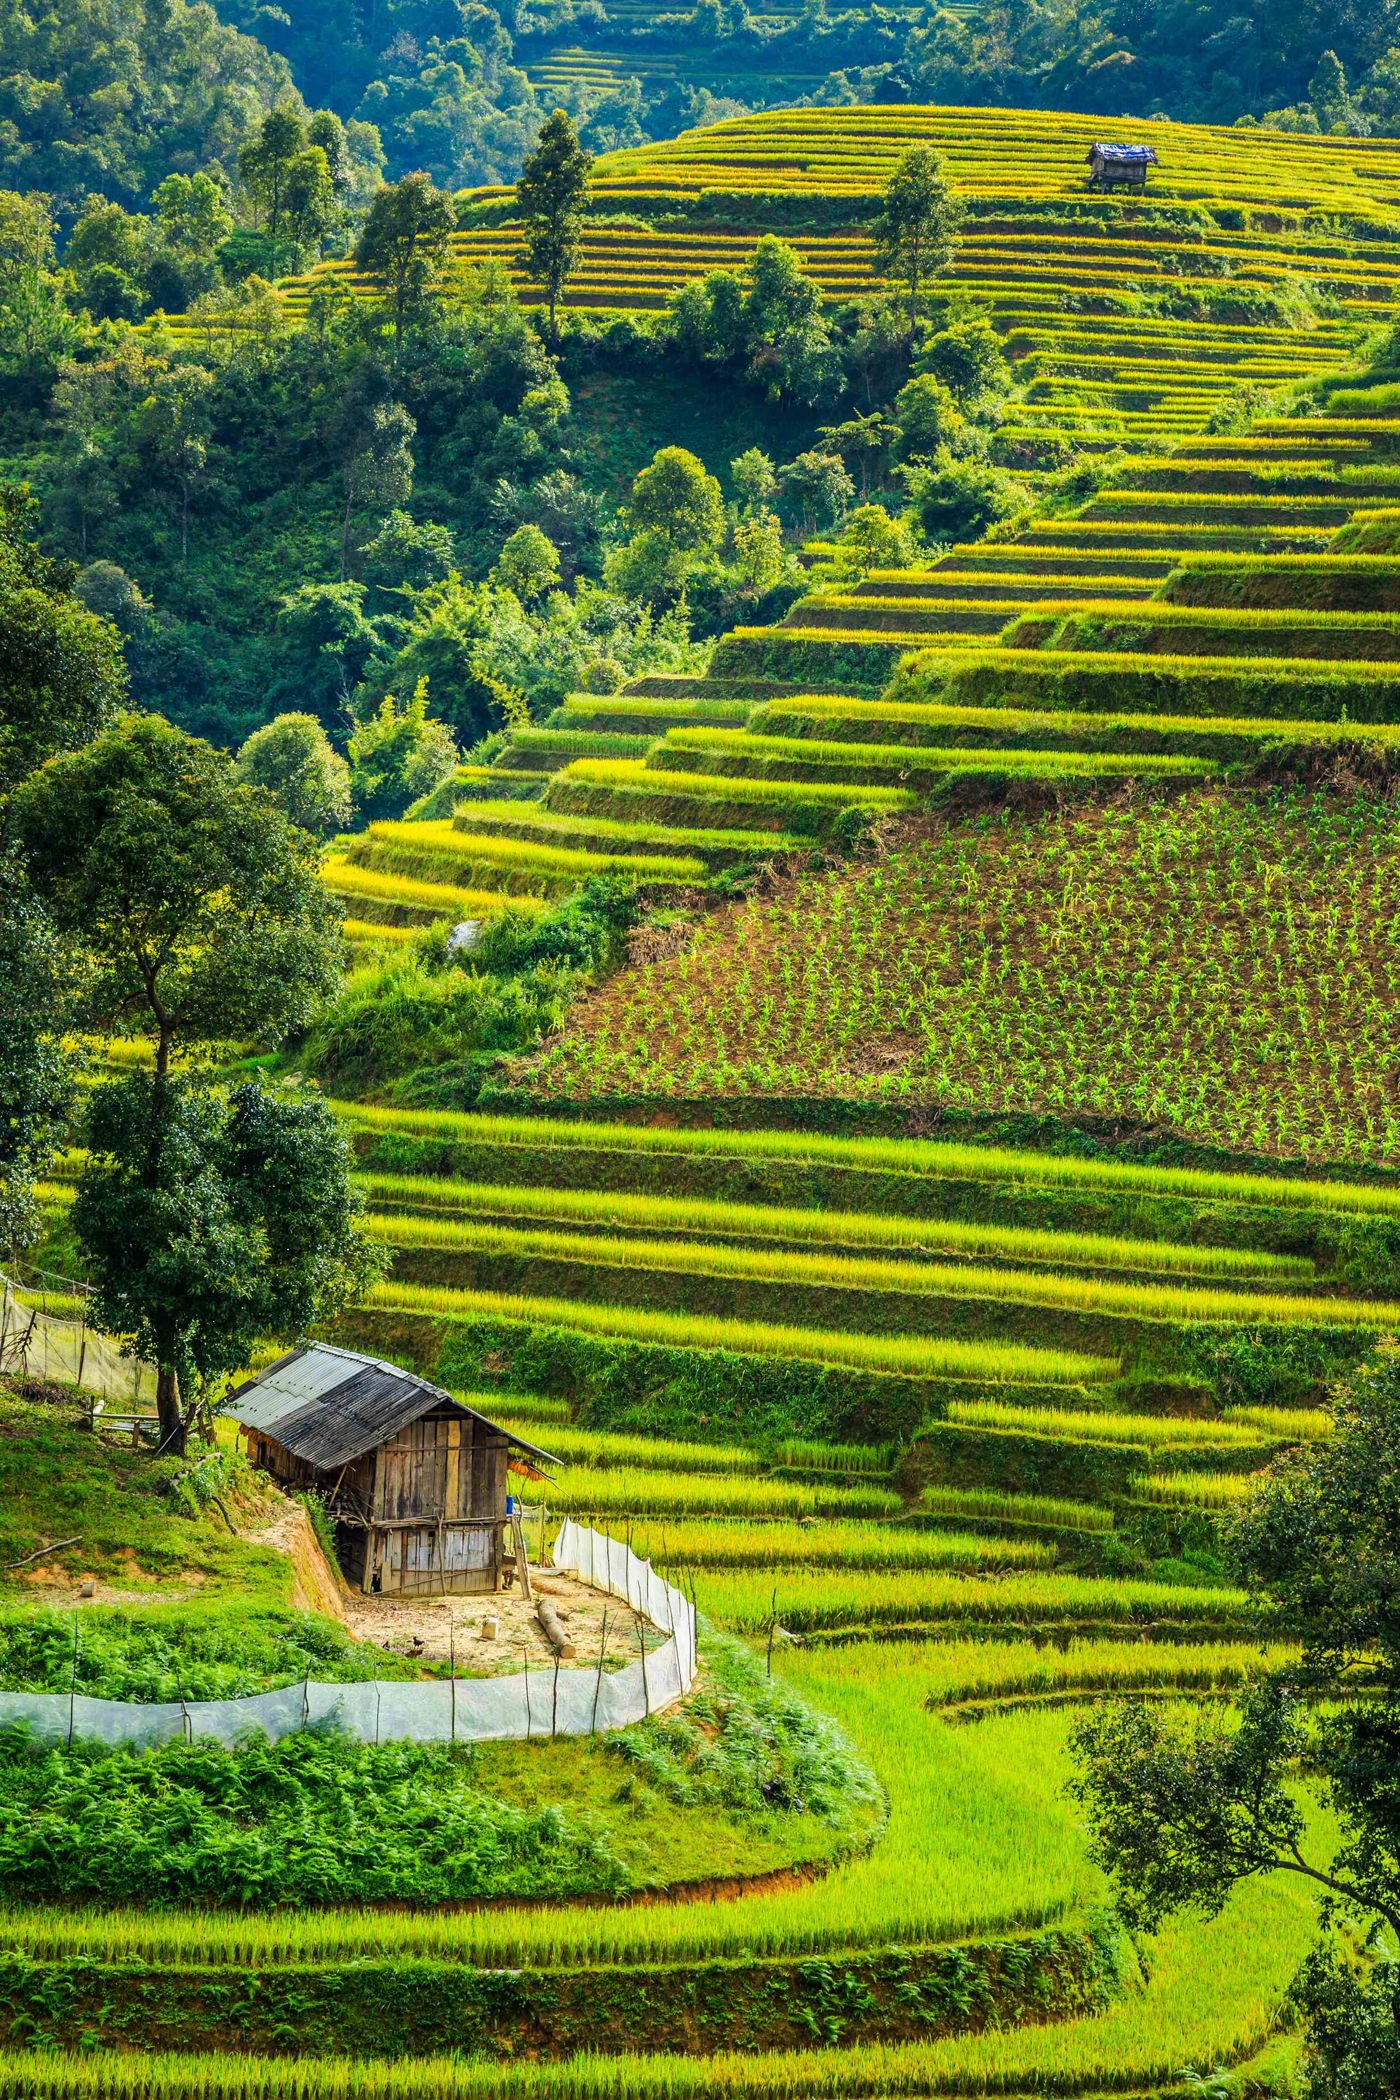 The reasons why you should visit Sapa once in your lifetime